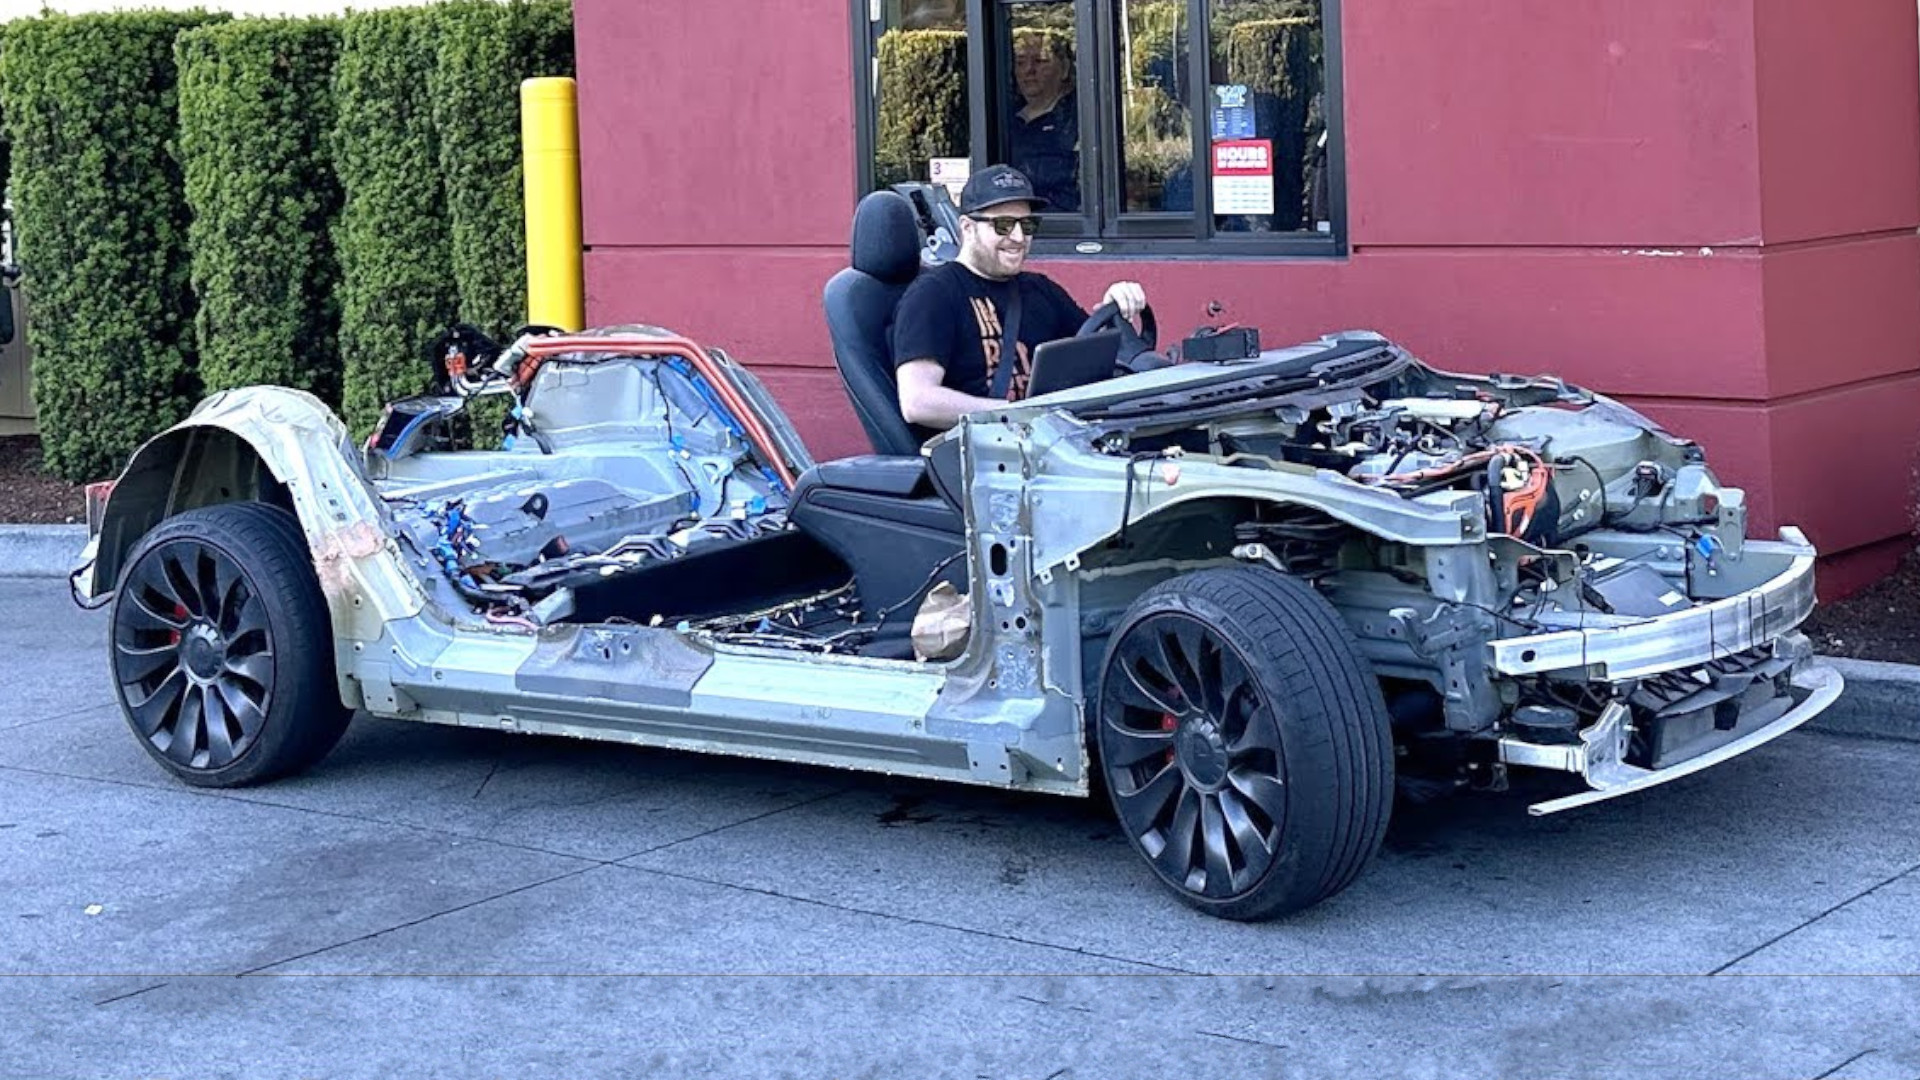 Tesla Model 3 ‘Go-Kart’ Is an Electric Deathtrap That’ll Do 0-60 in 2.4 Seconds